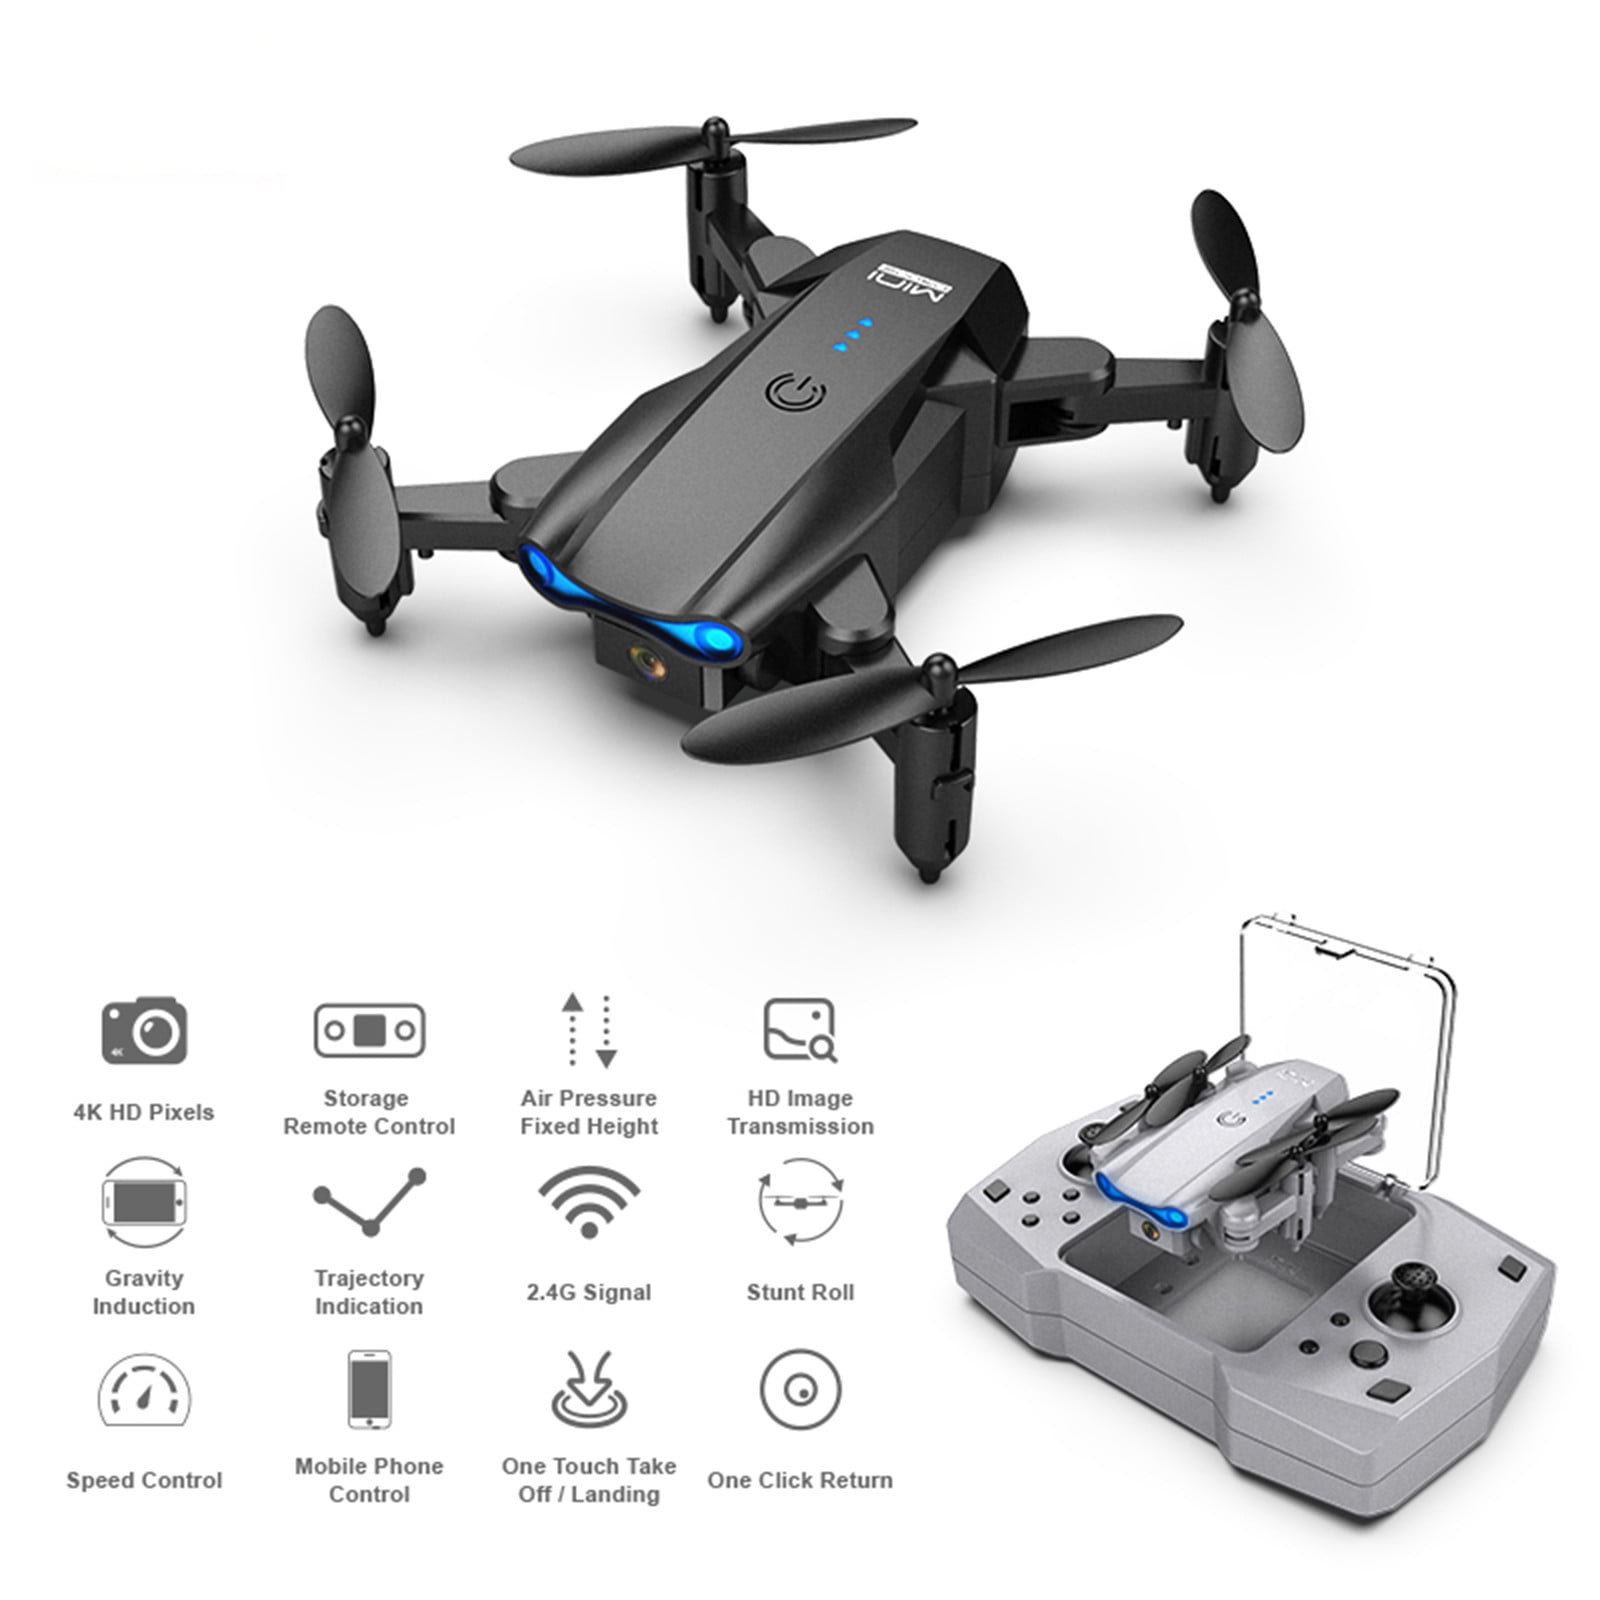 Mini Drone with Induction Mode of Gravity FPV Potensic Drone with HD Camera 